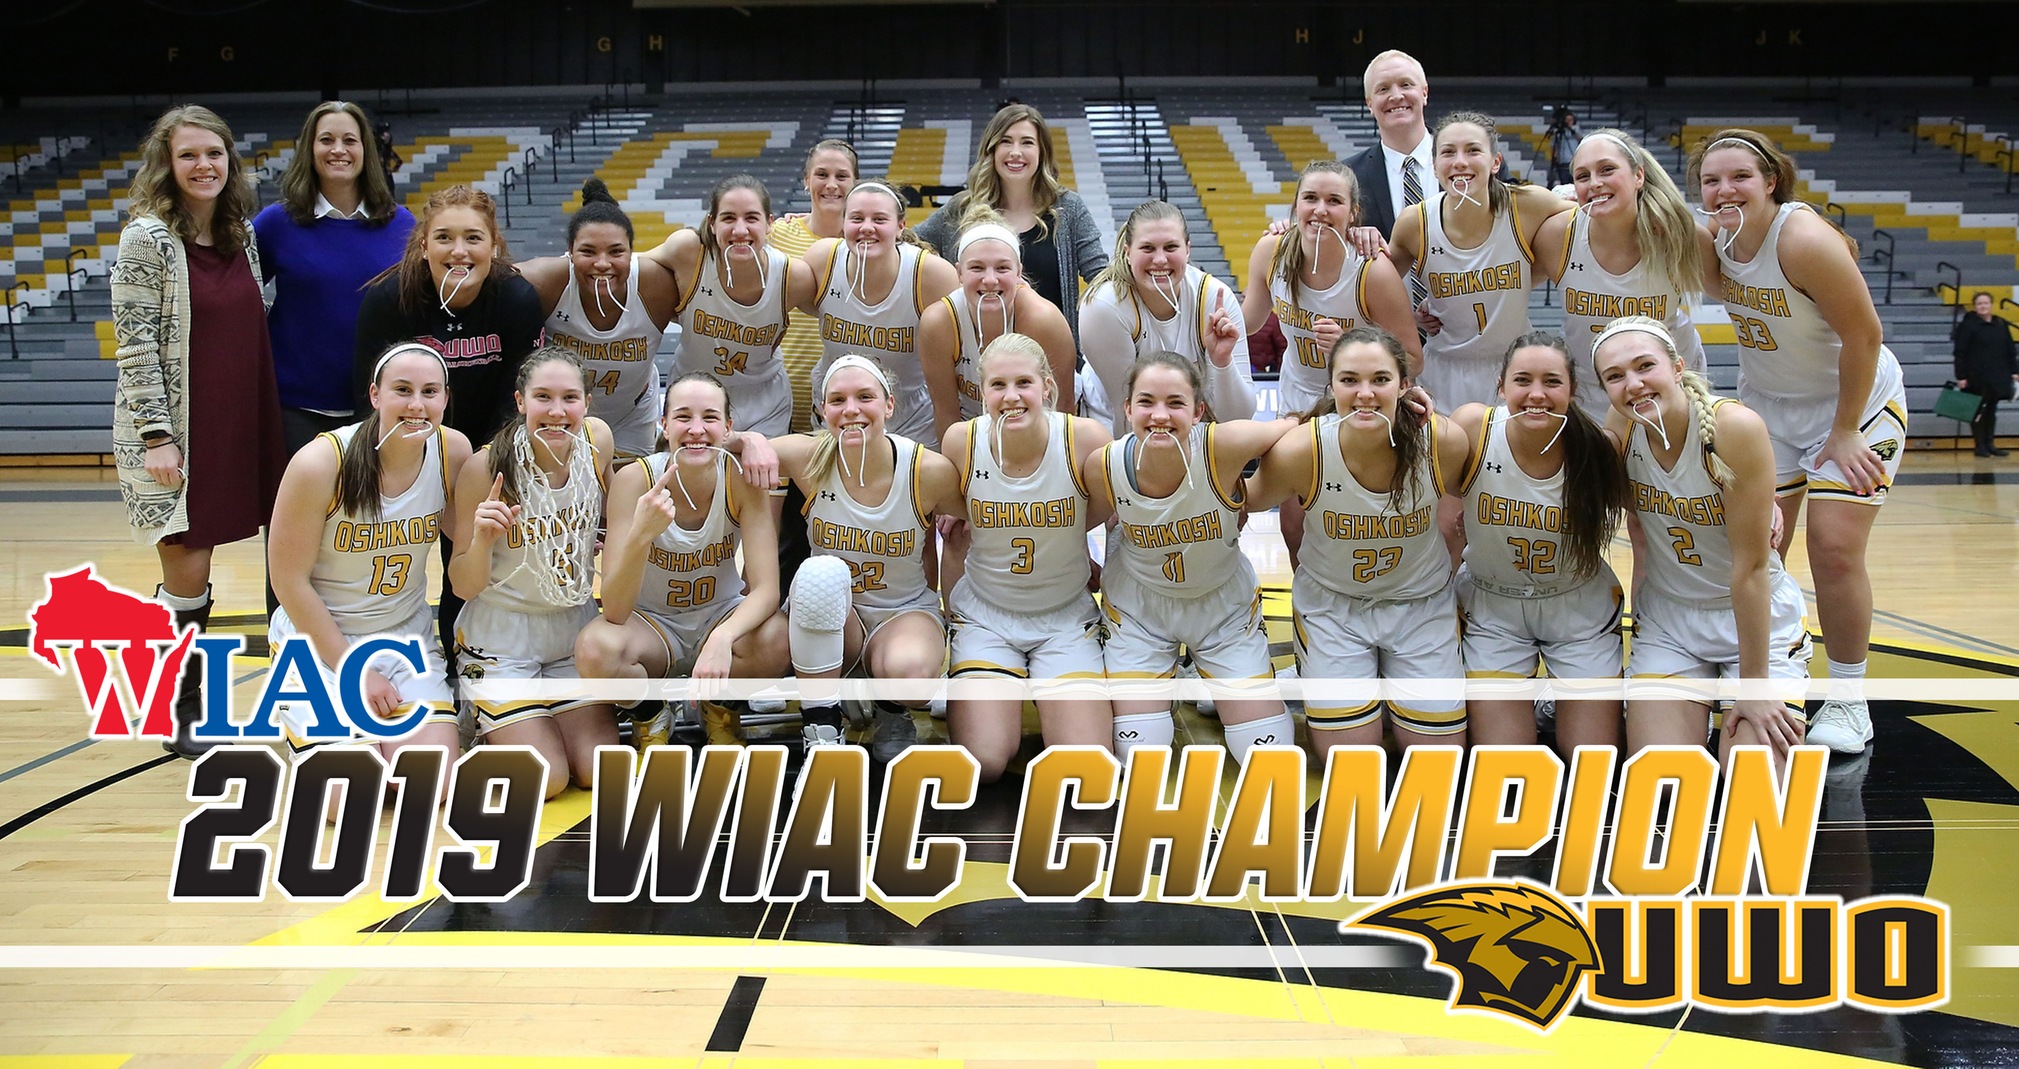 UW-Oshkosh has won the WIAC title twice in the past three years and 13 times overall.